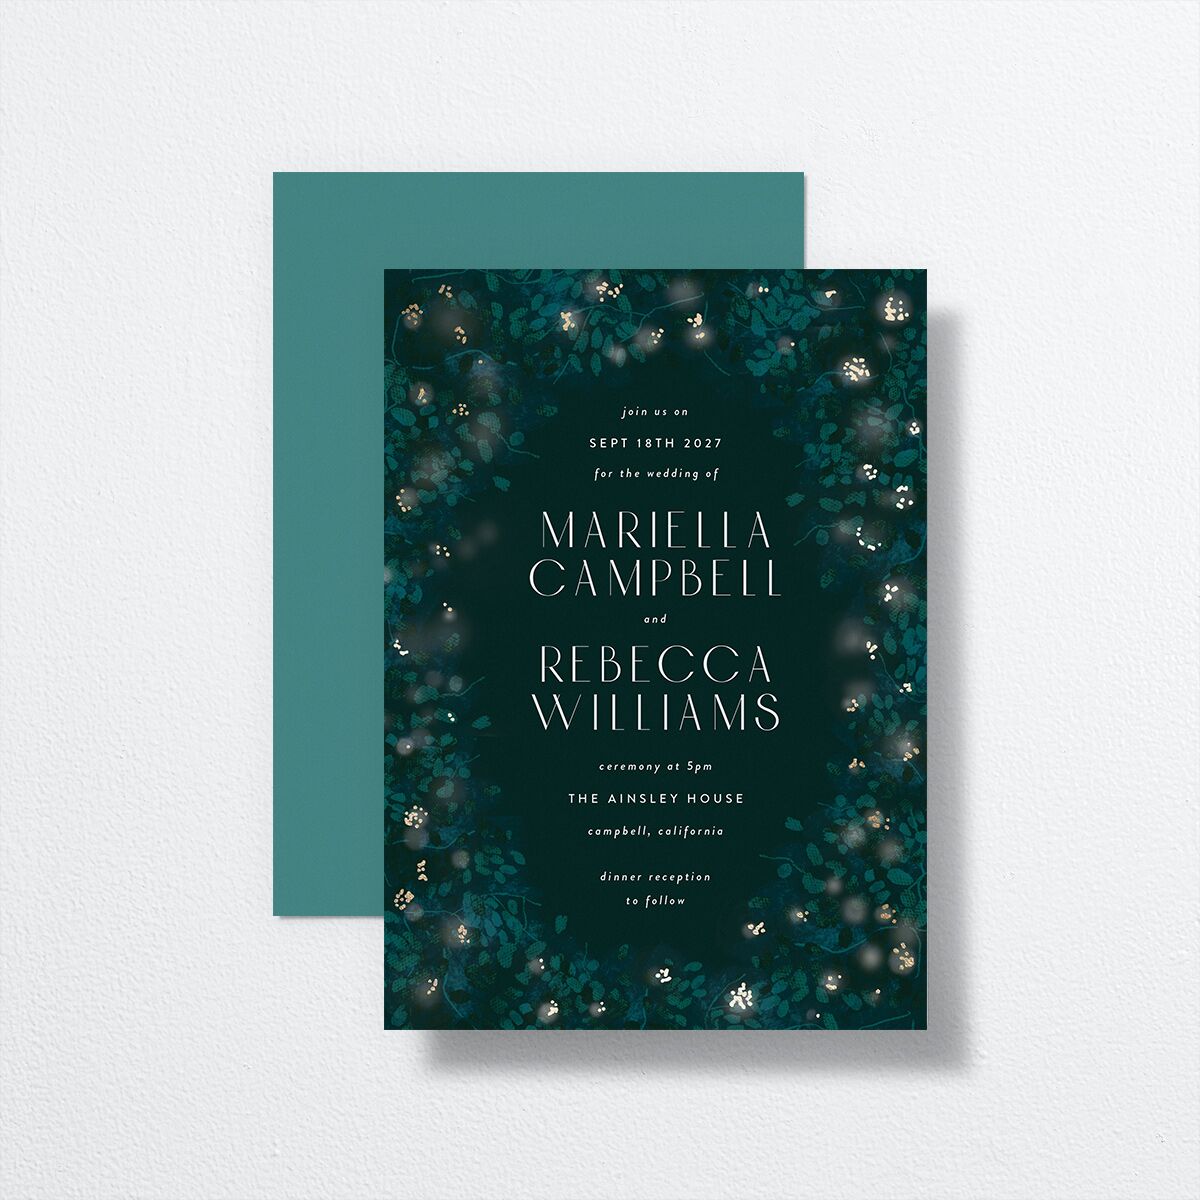 Moonlit Garden Wedding Invitations front-and-back in teal